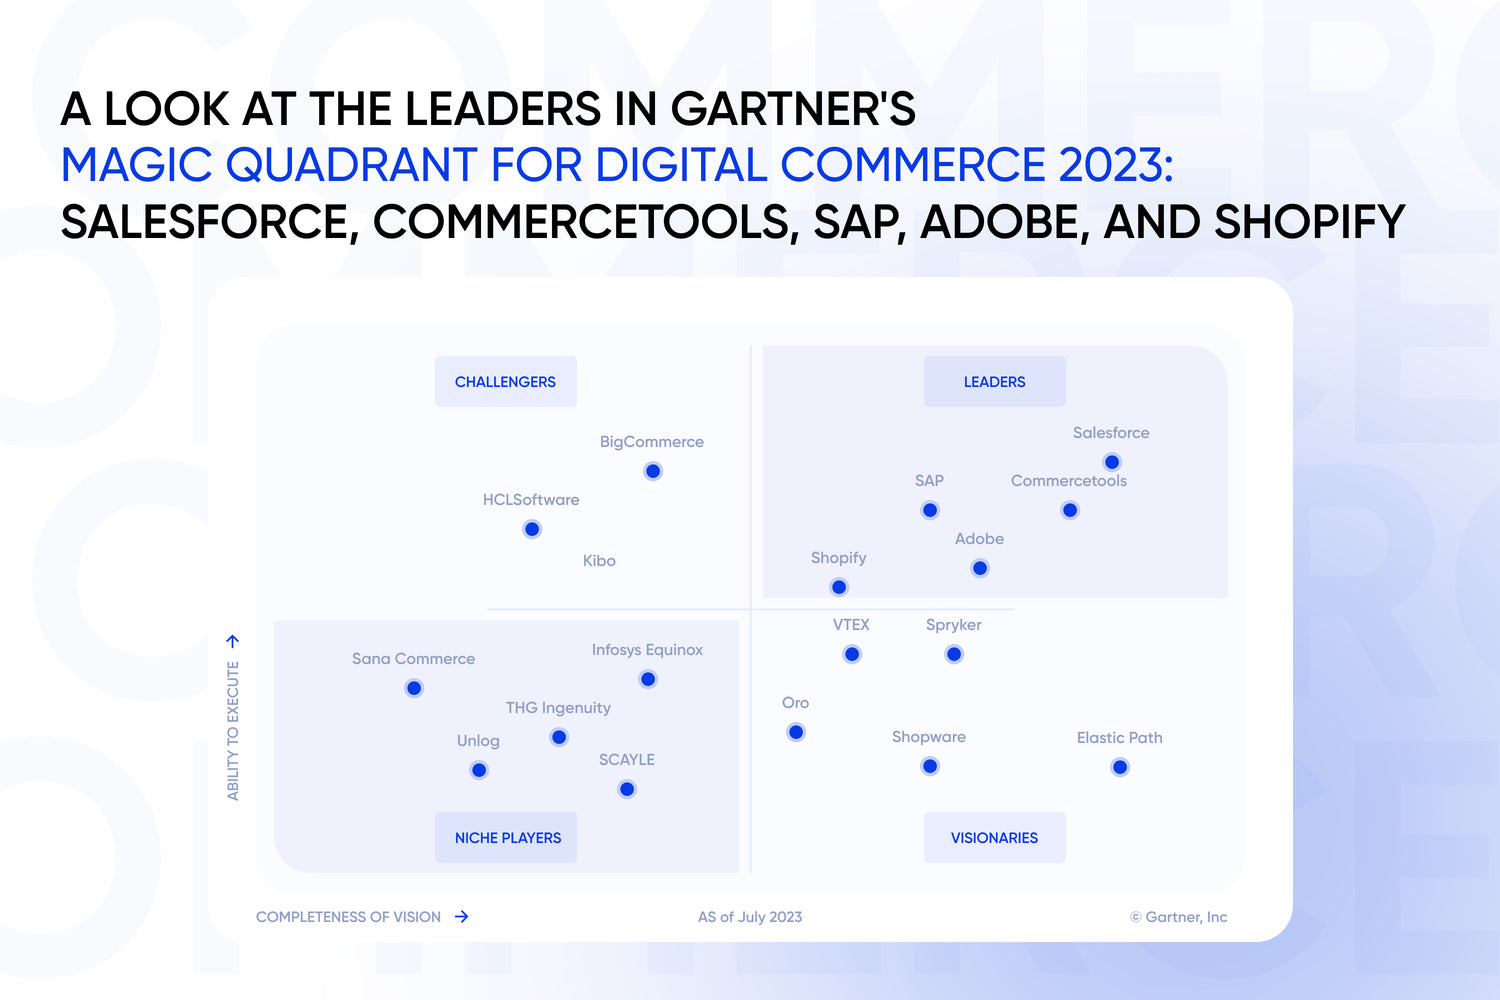 A look at the leaders in Gartner's Magic Quadrant for Digital Commerce 2023: Salesforce, commercetools, SAP, Adobe, and Shopify